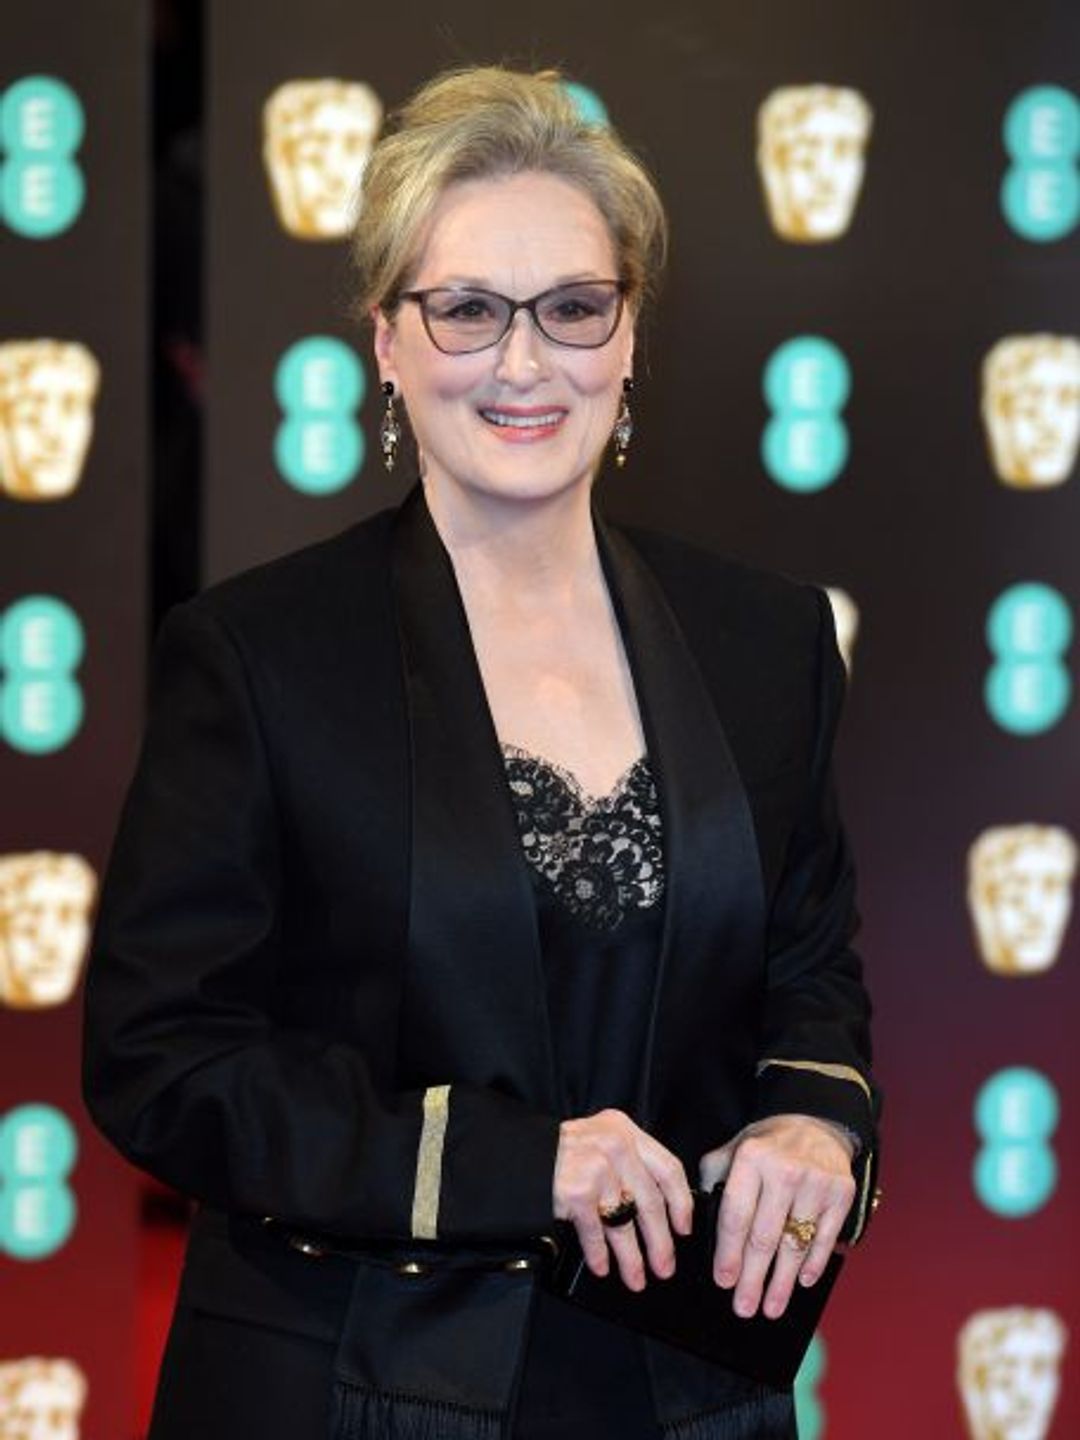 Meryl Streep accused Karl Lagerfeld of defamation after his comments about her Oscars dress